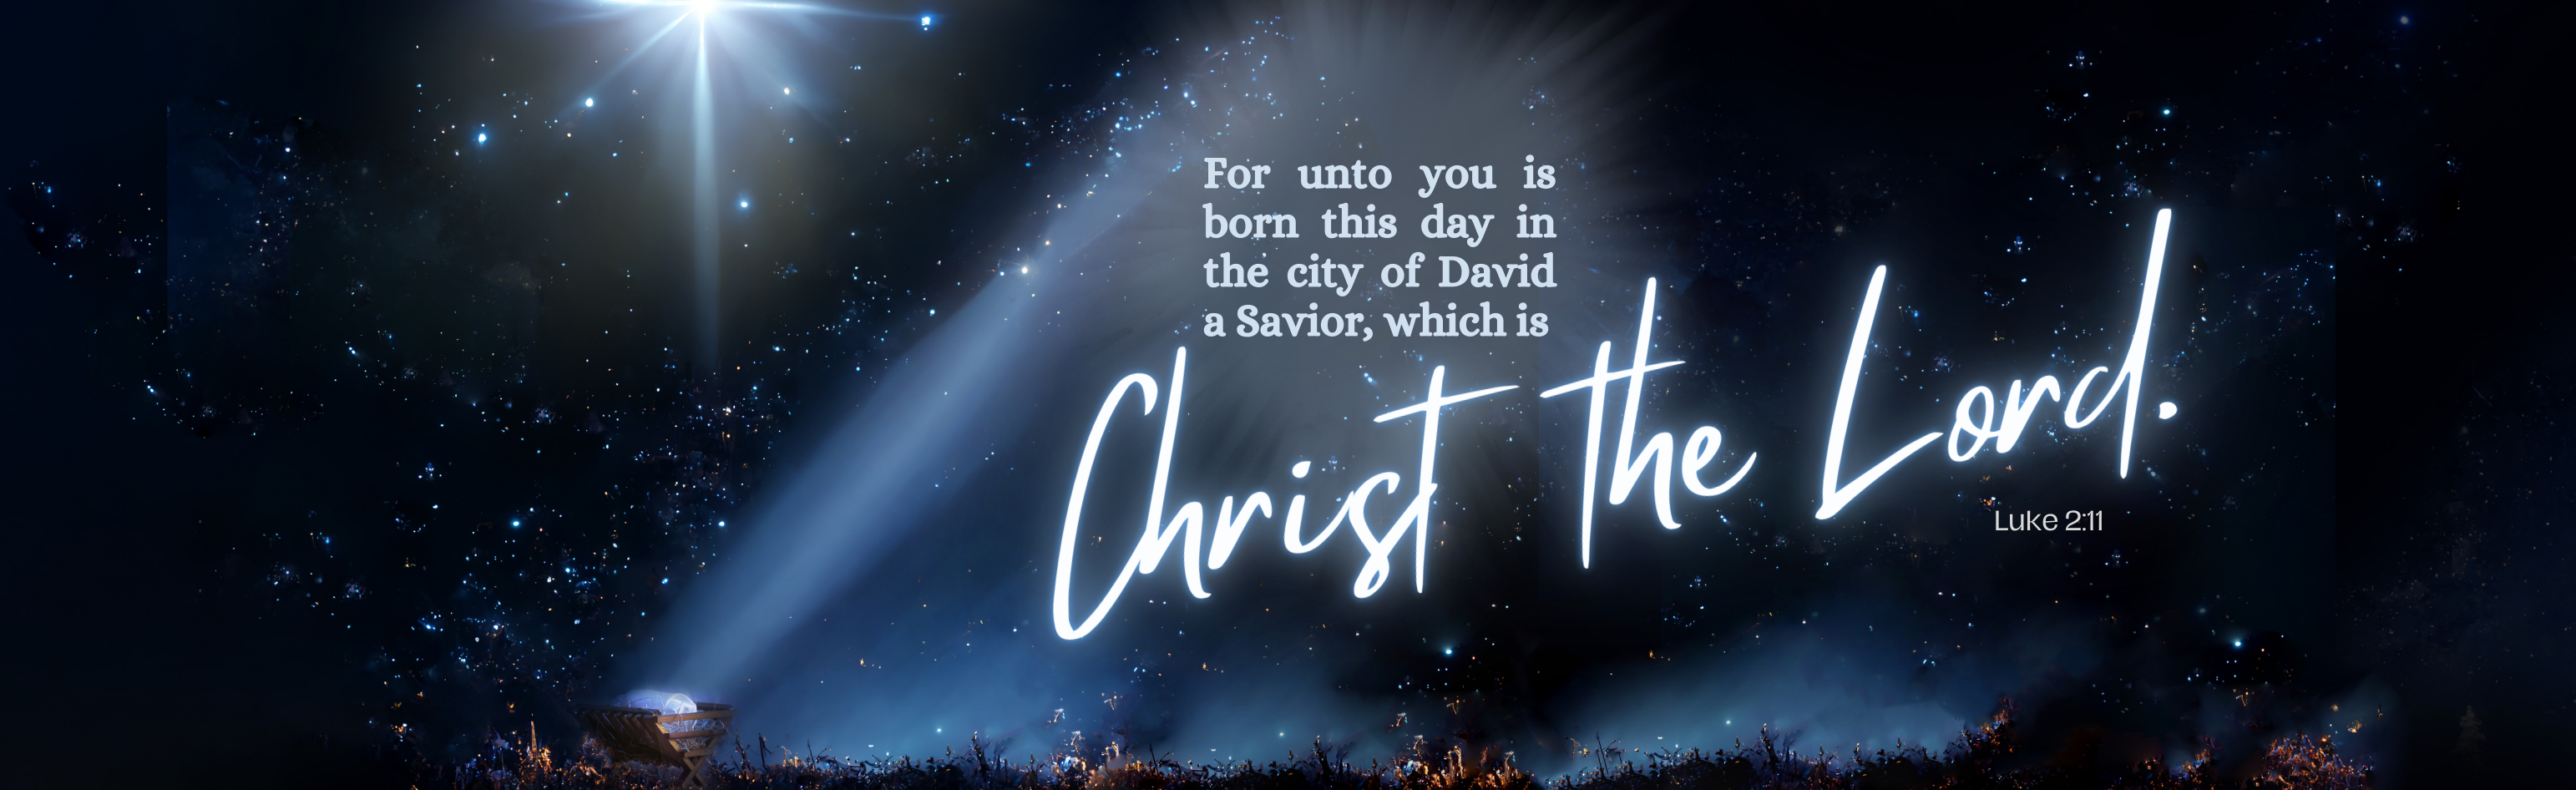 For unto you is born this day in the city of David a Saviour, which is Christ the Lord. Luke chapter 2 verse 11